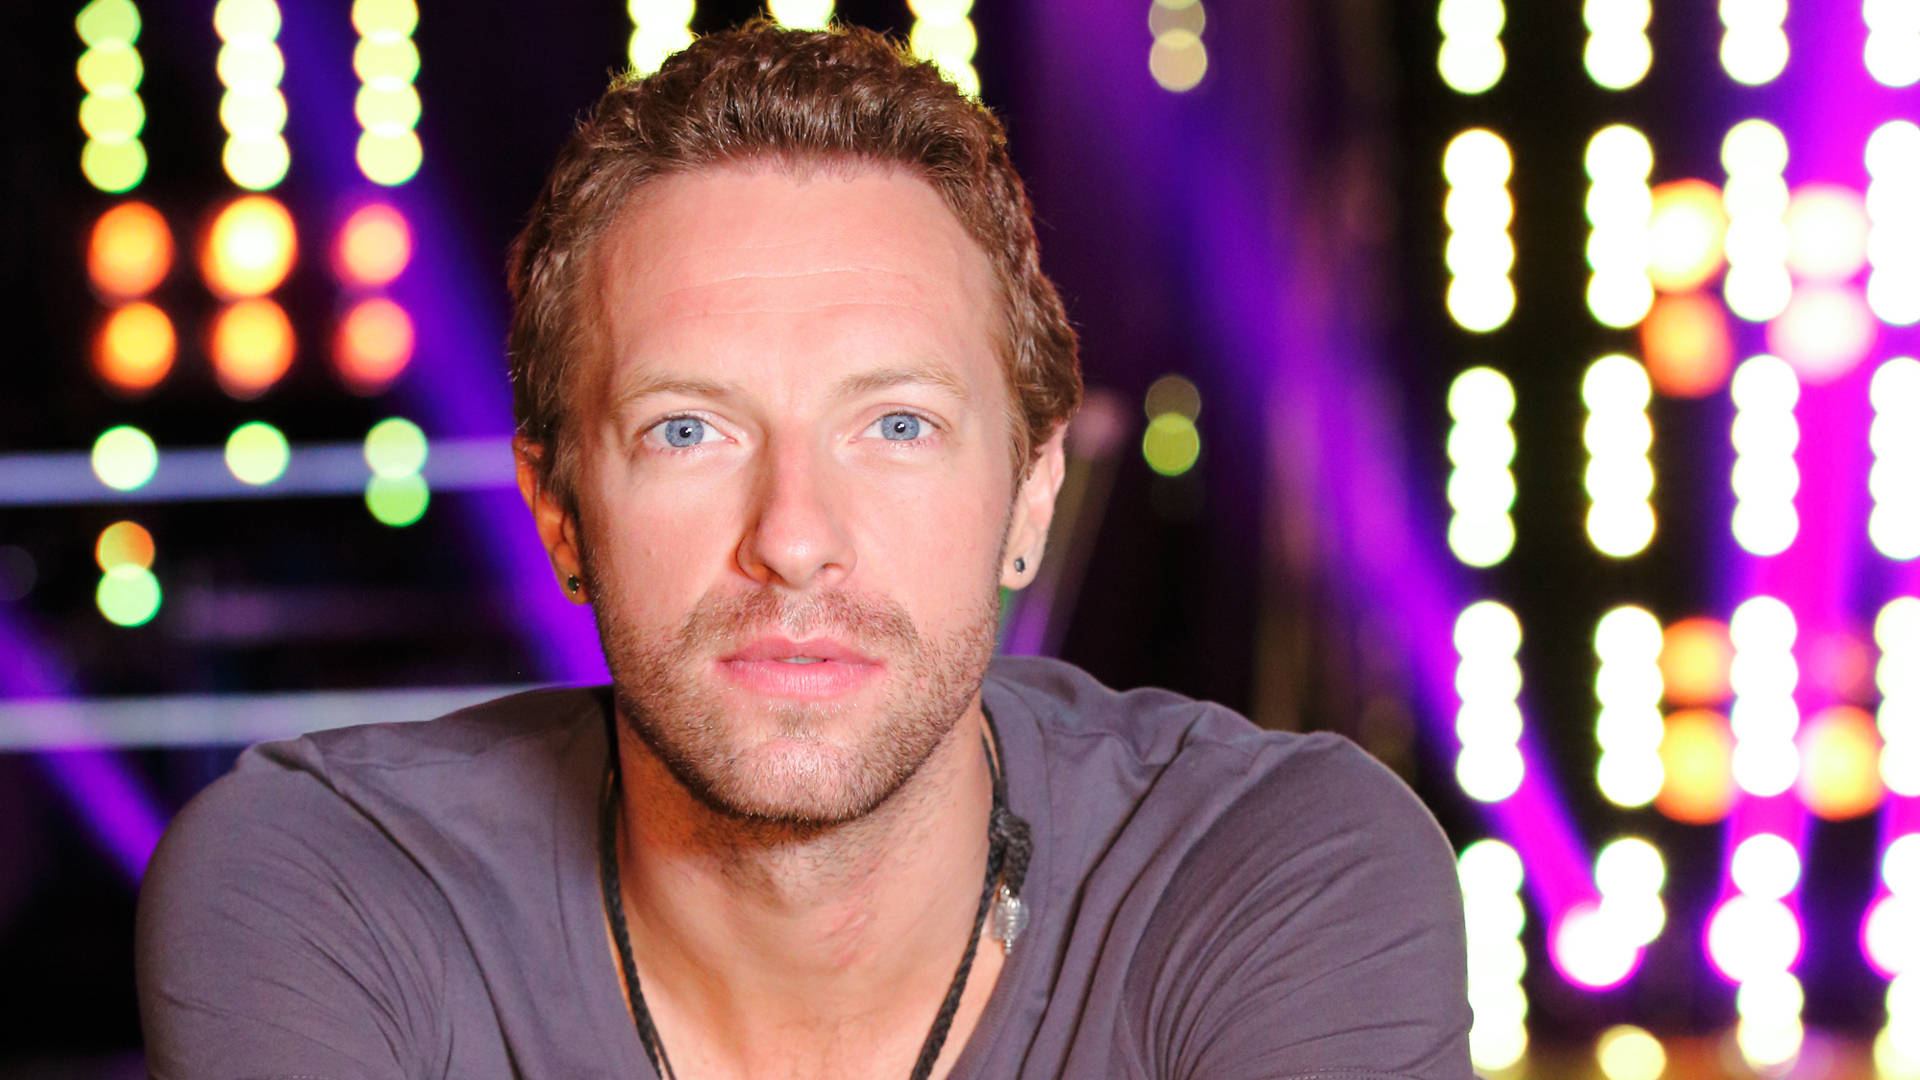 Chris Martin The Voice Background